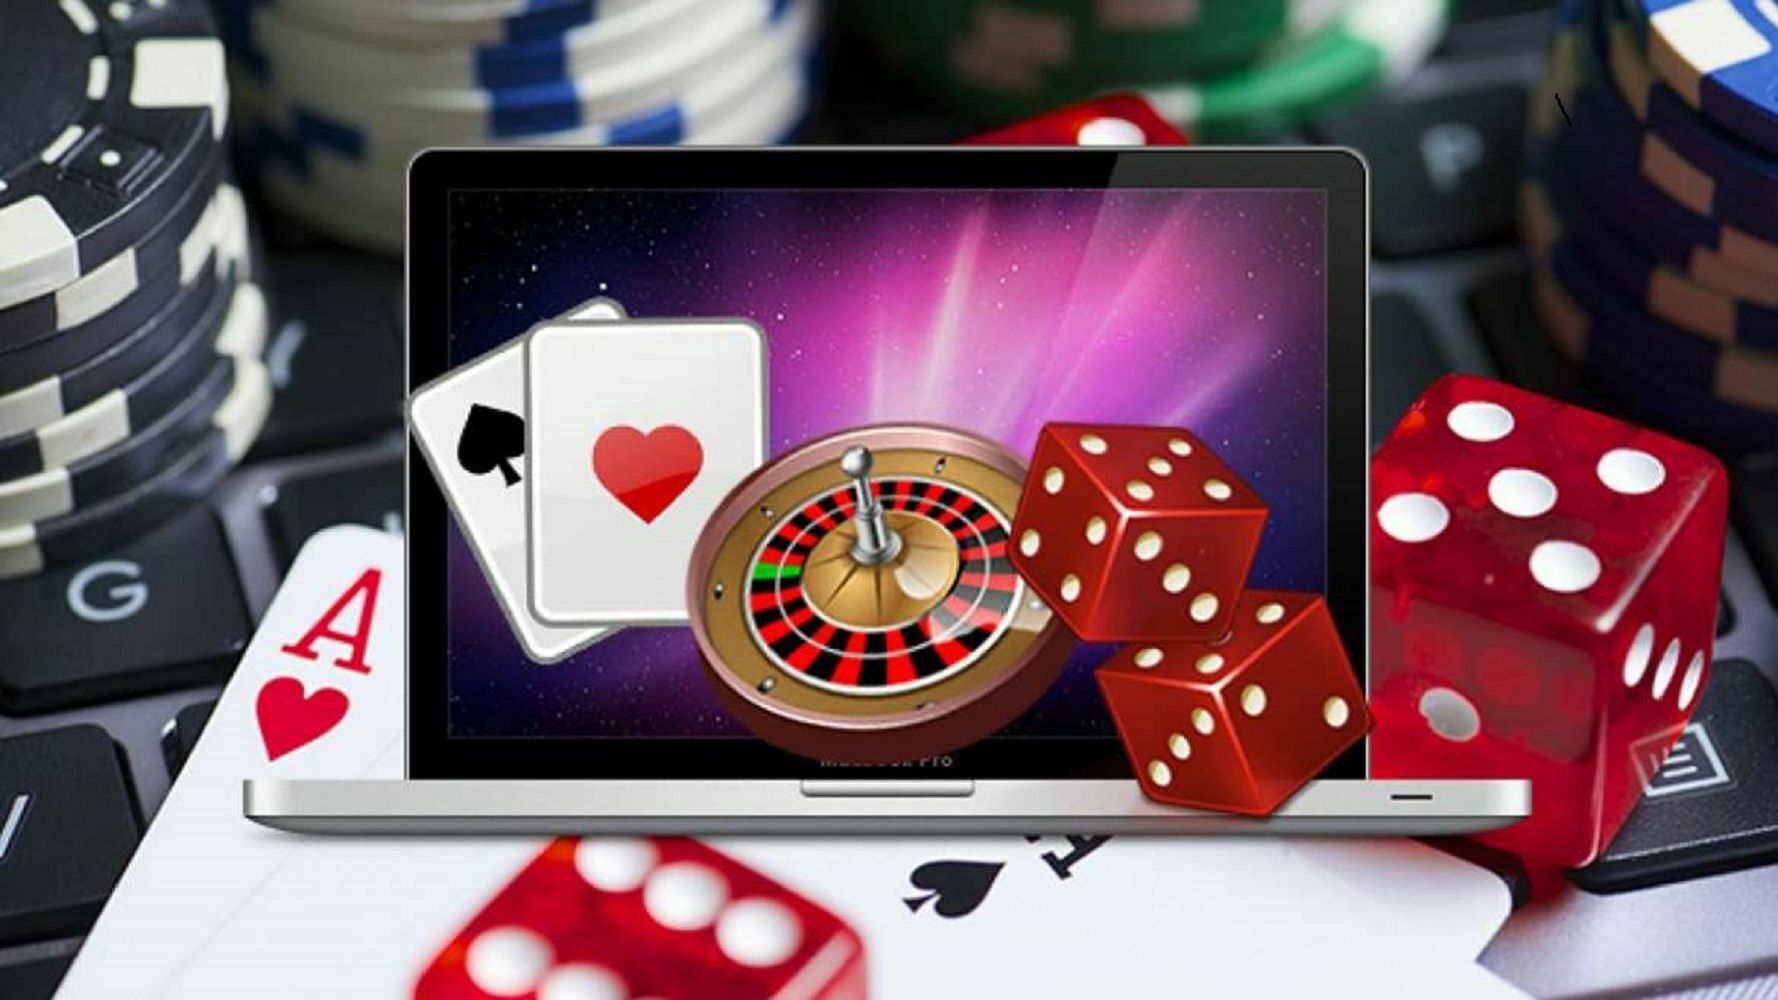 Banks complained about the difficulties of blocking transfers of online casinos